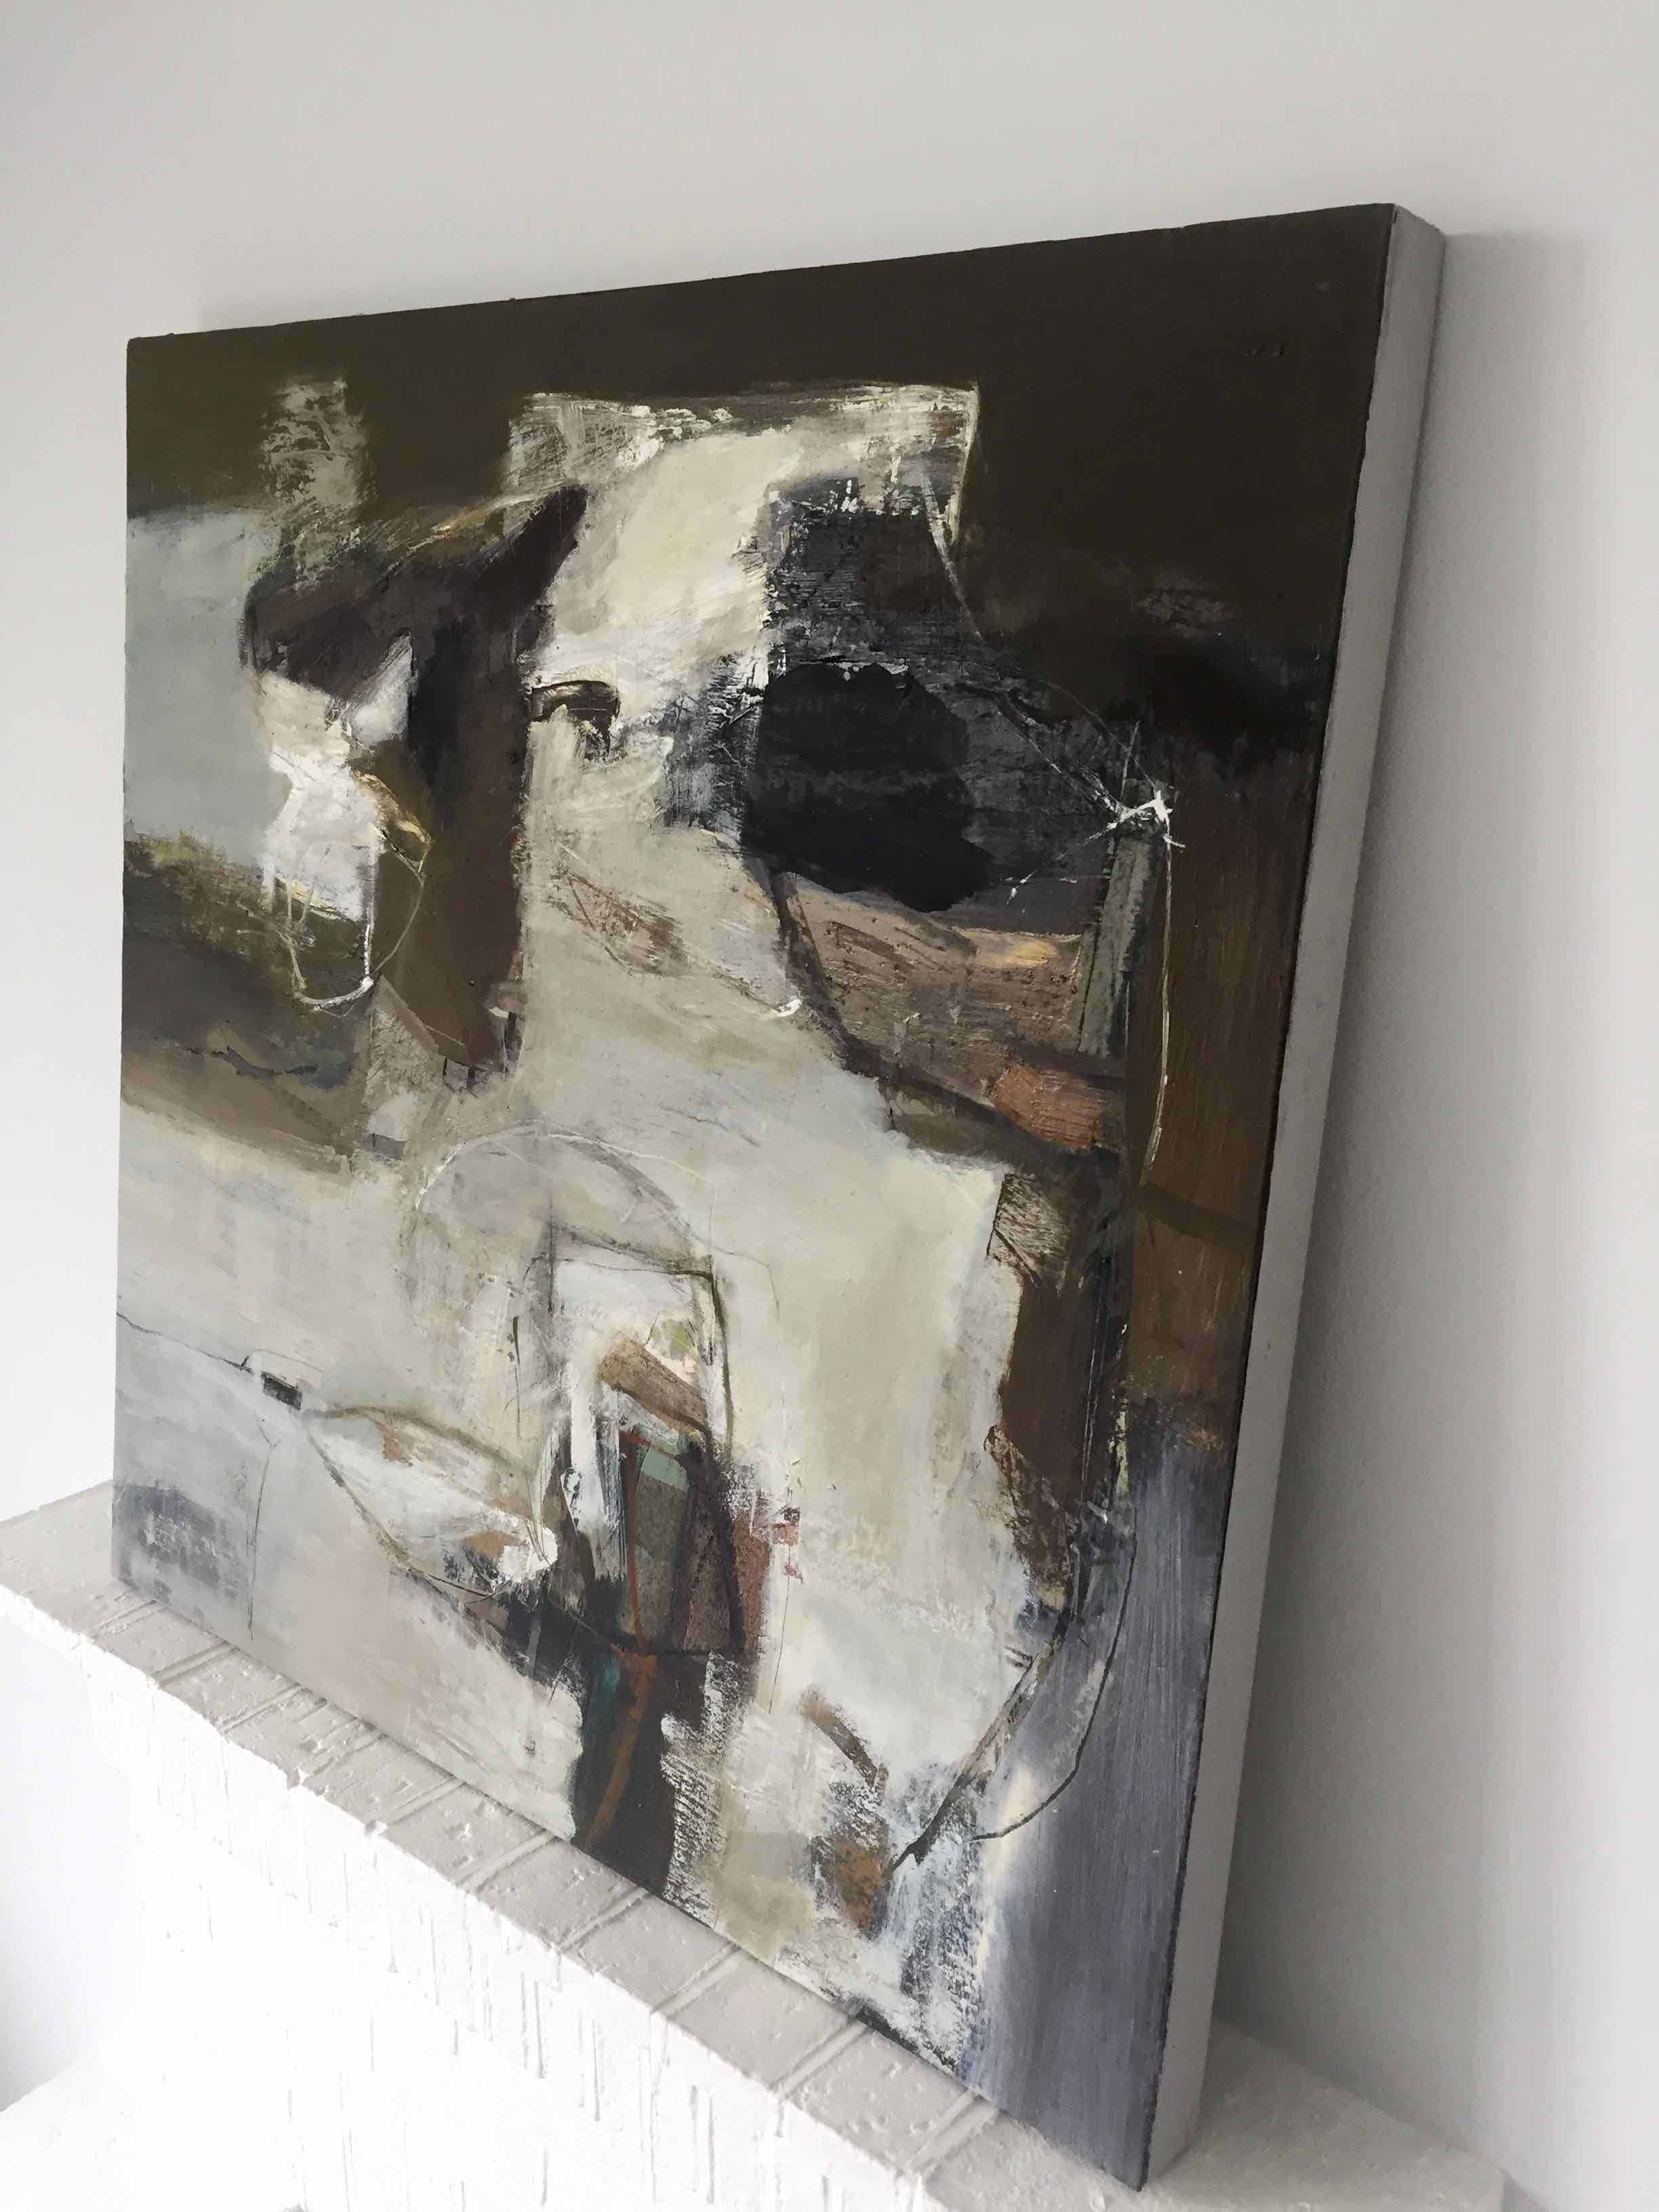 Folding Contour, 2016, oil on board, 23 3/5 × 24 × 1 3/5 in, 60 × 61 × 4 cm by Chris Sims

This painting is one of a set of three, but can be sold individually. It is an original oil painting on board, which has a rear wooden support structure, and